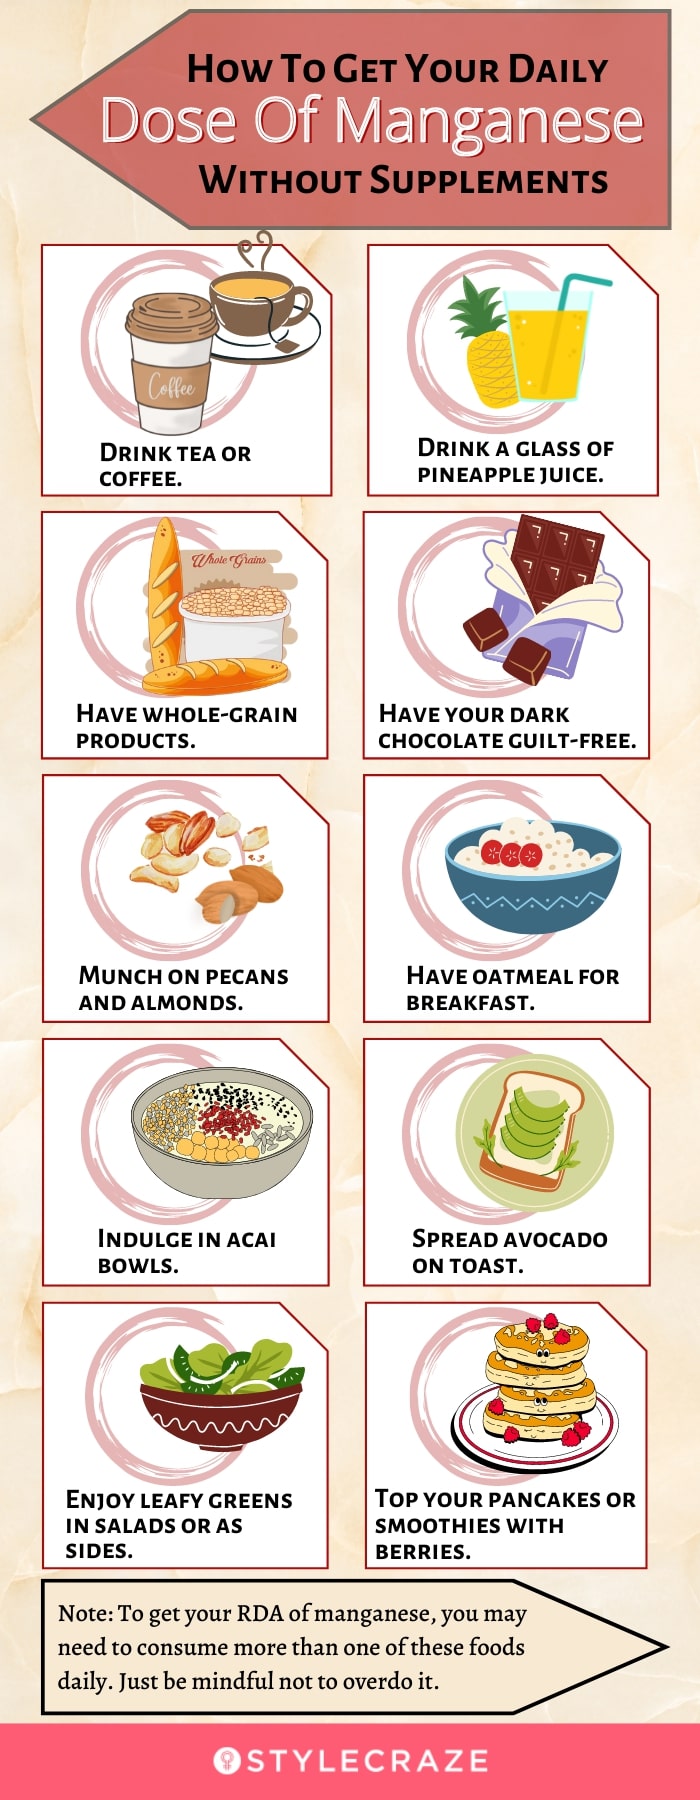 how to get your daily dose of manganese without supplements [infographic]